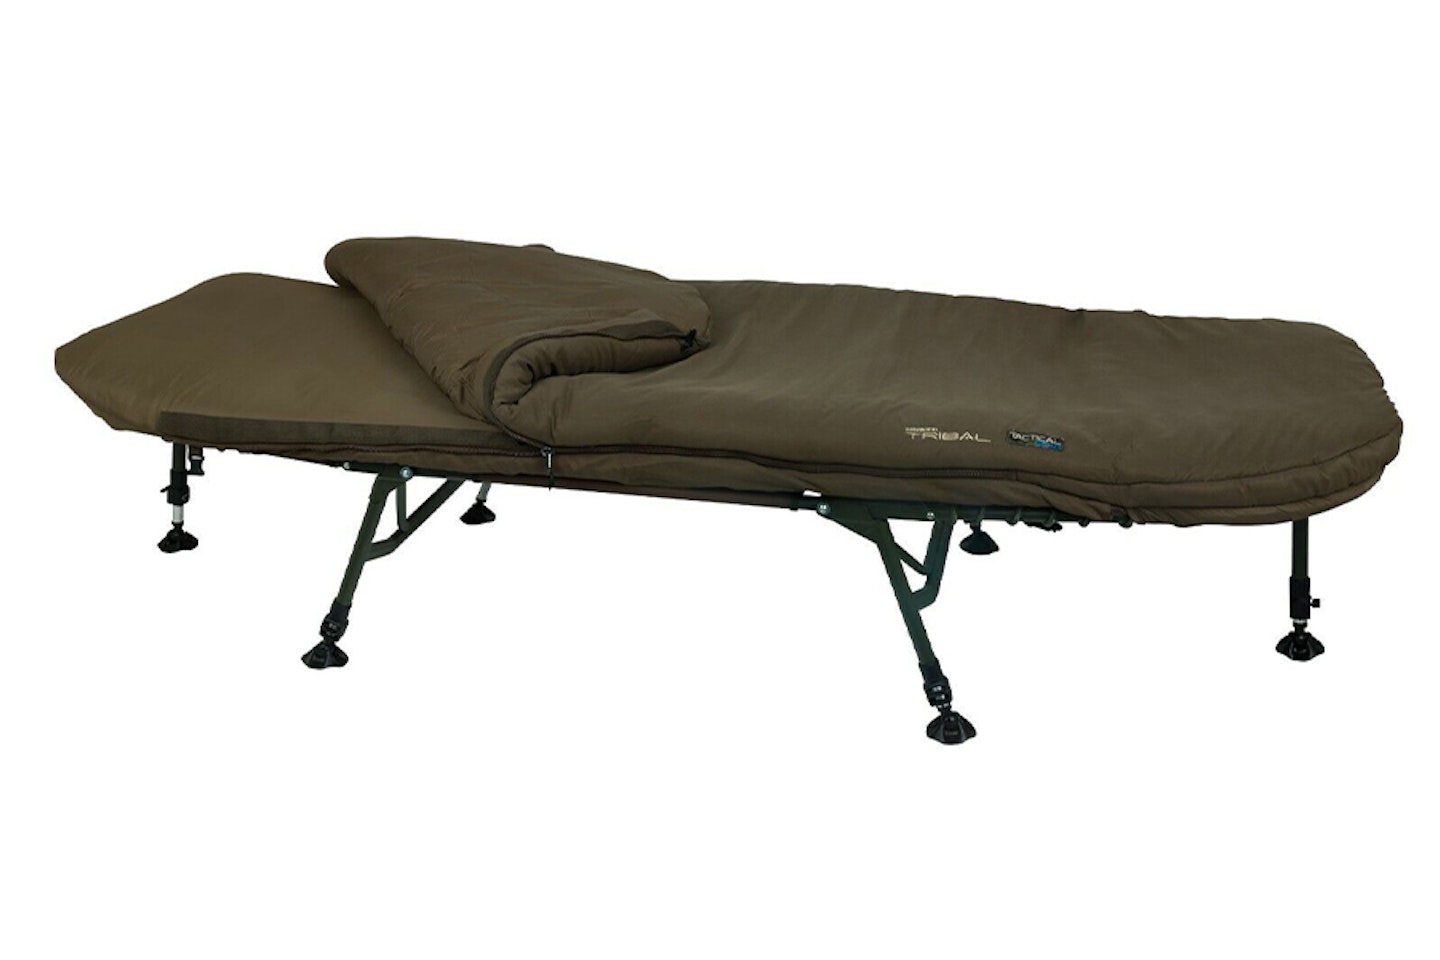 Shimano Tactical Tribal Bedchair System